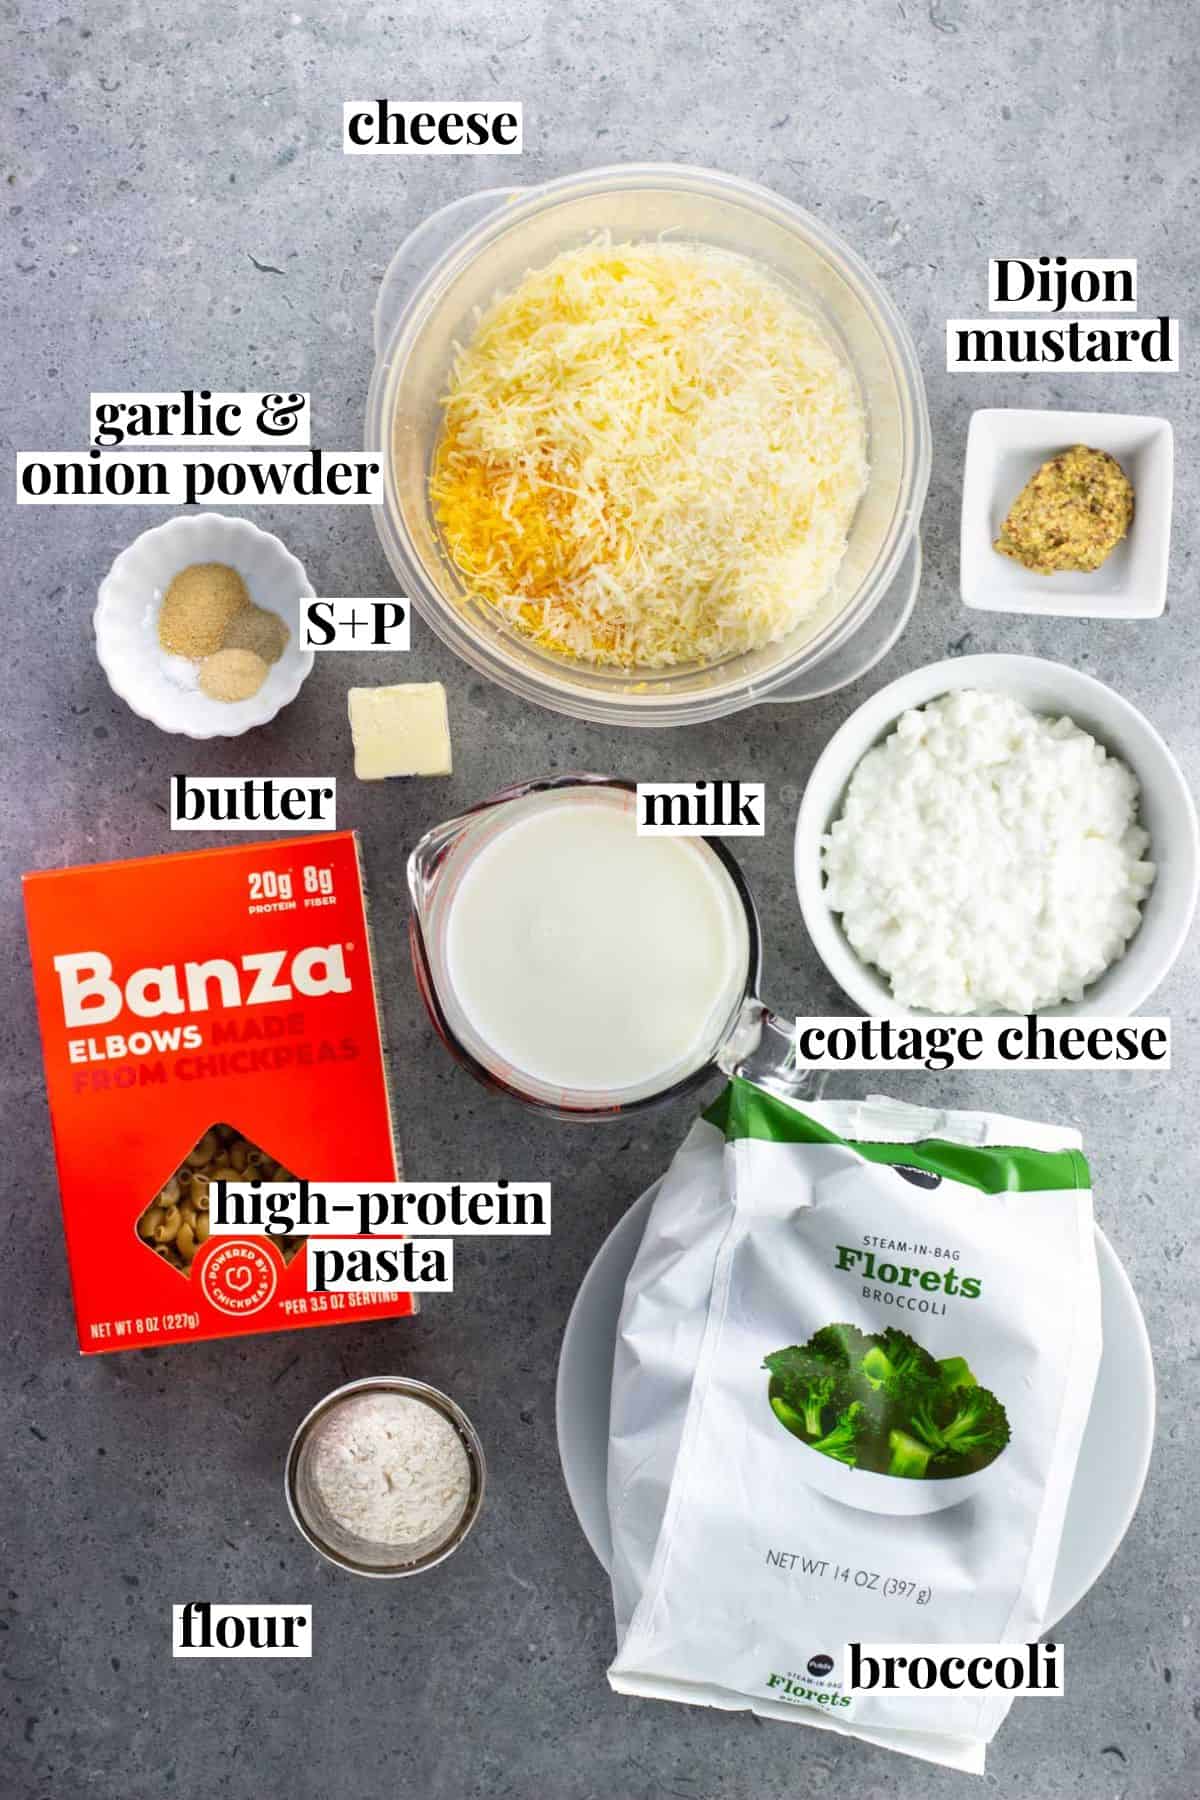 Recipe ingredients in separate containers with text labels.